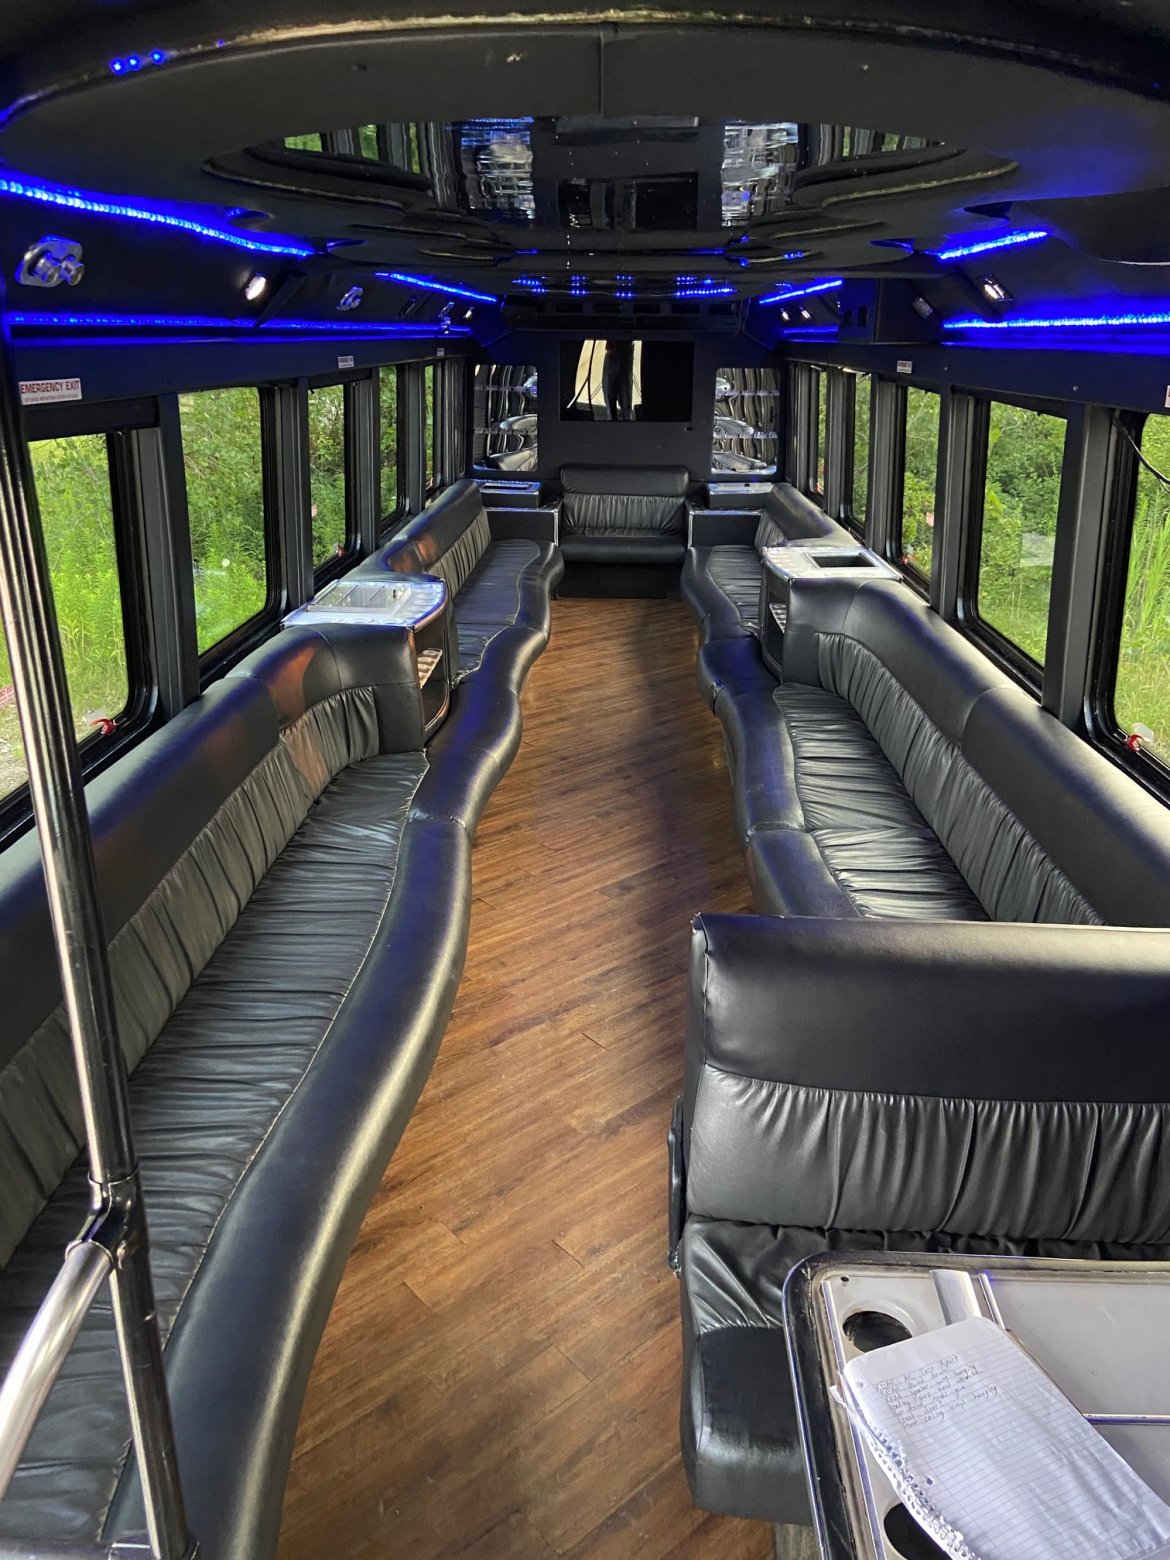 Limo Bus for sale: 2007 Freightliner Glaval Apollo Midwest by Midwest